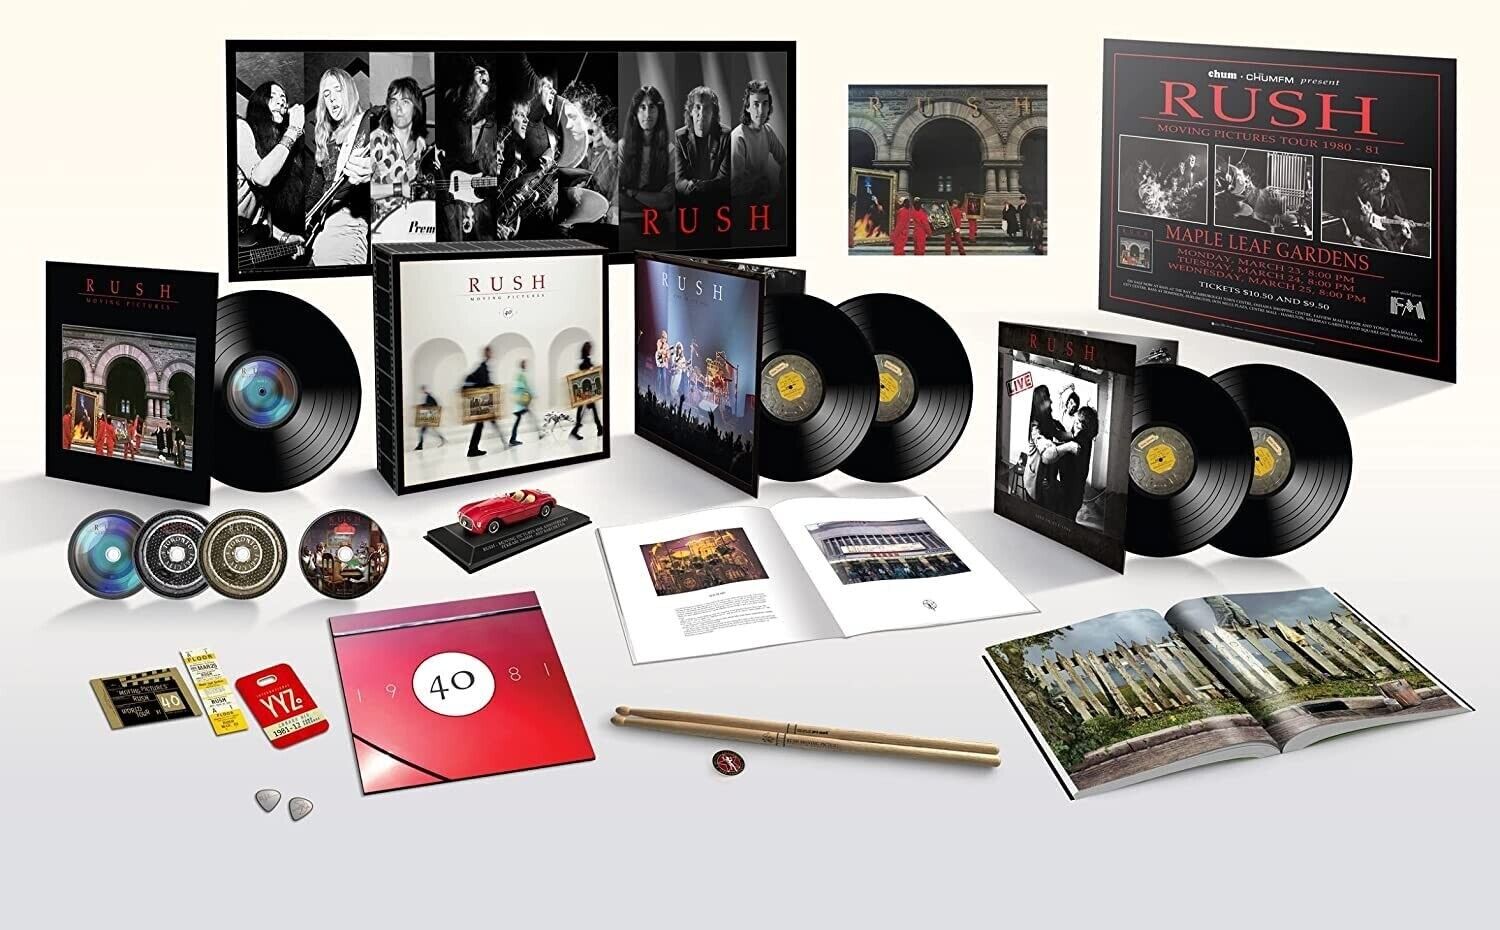 Rush Moving Pictures (40th Anniversary) [Super Deluxe 3CD/5LP/Blu-Ray] - New